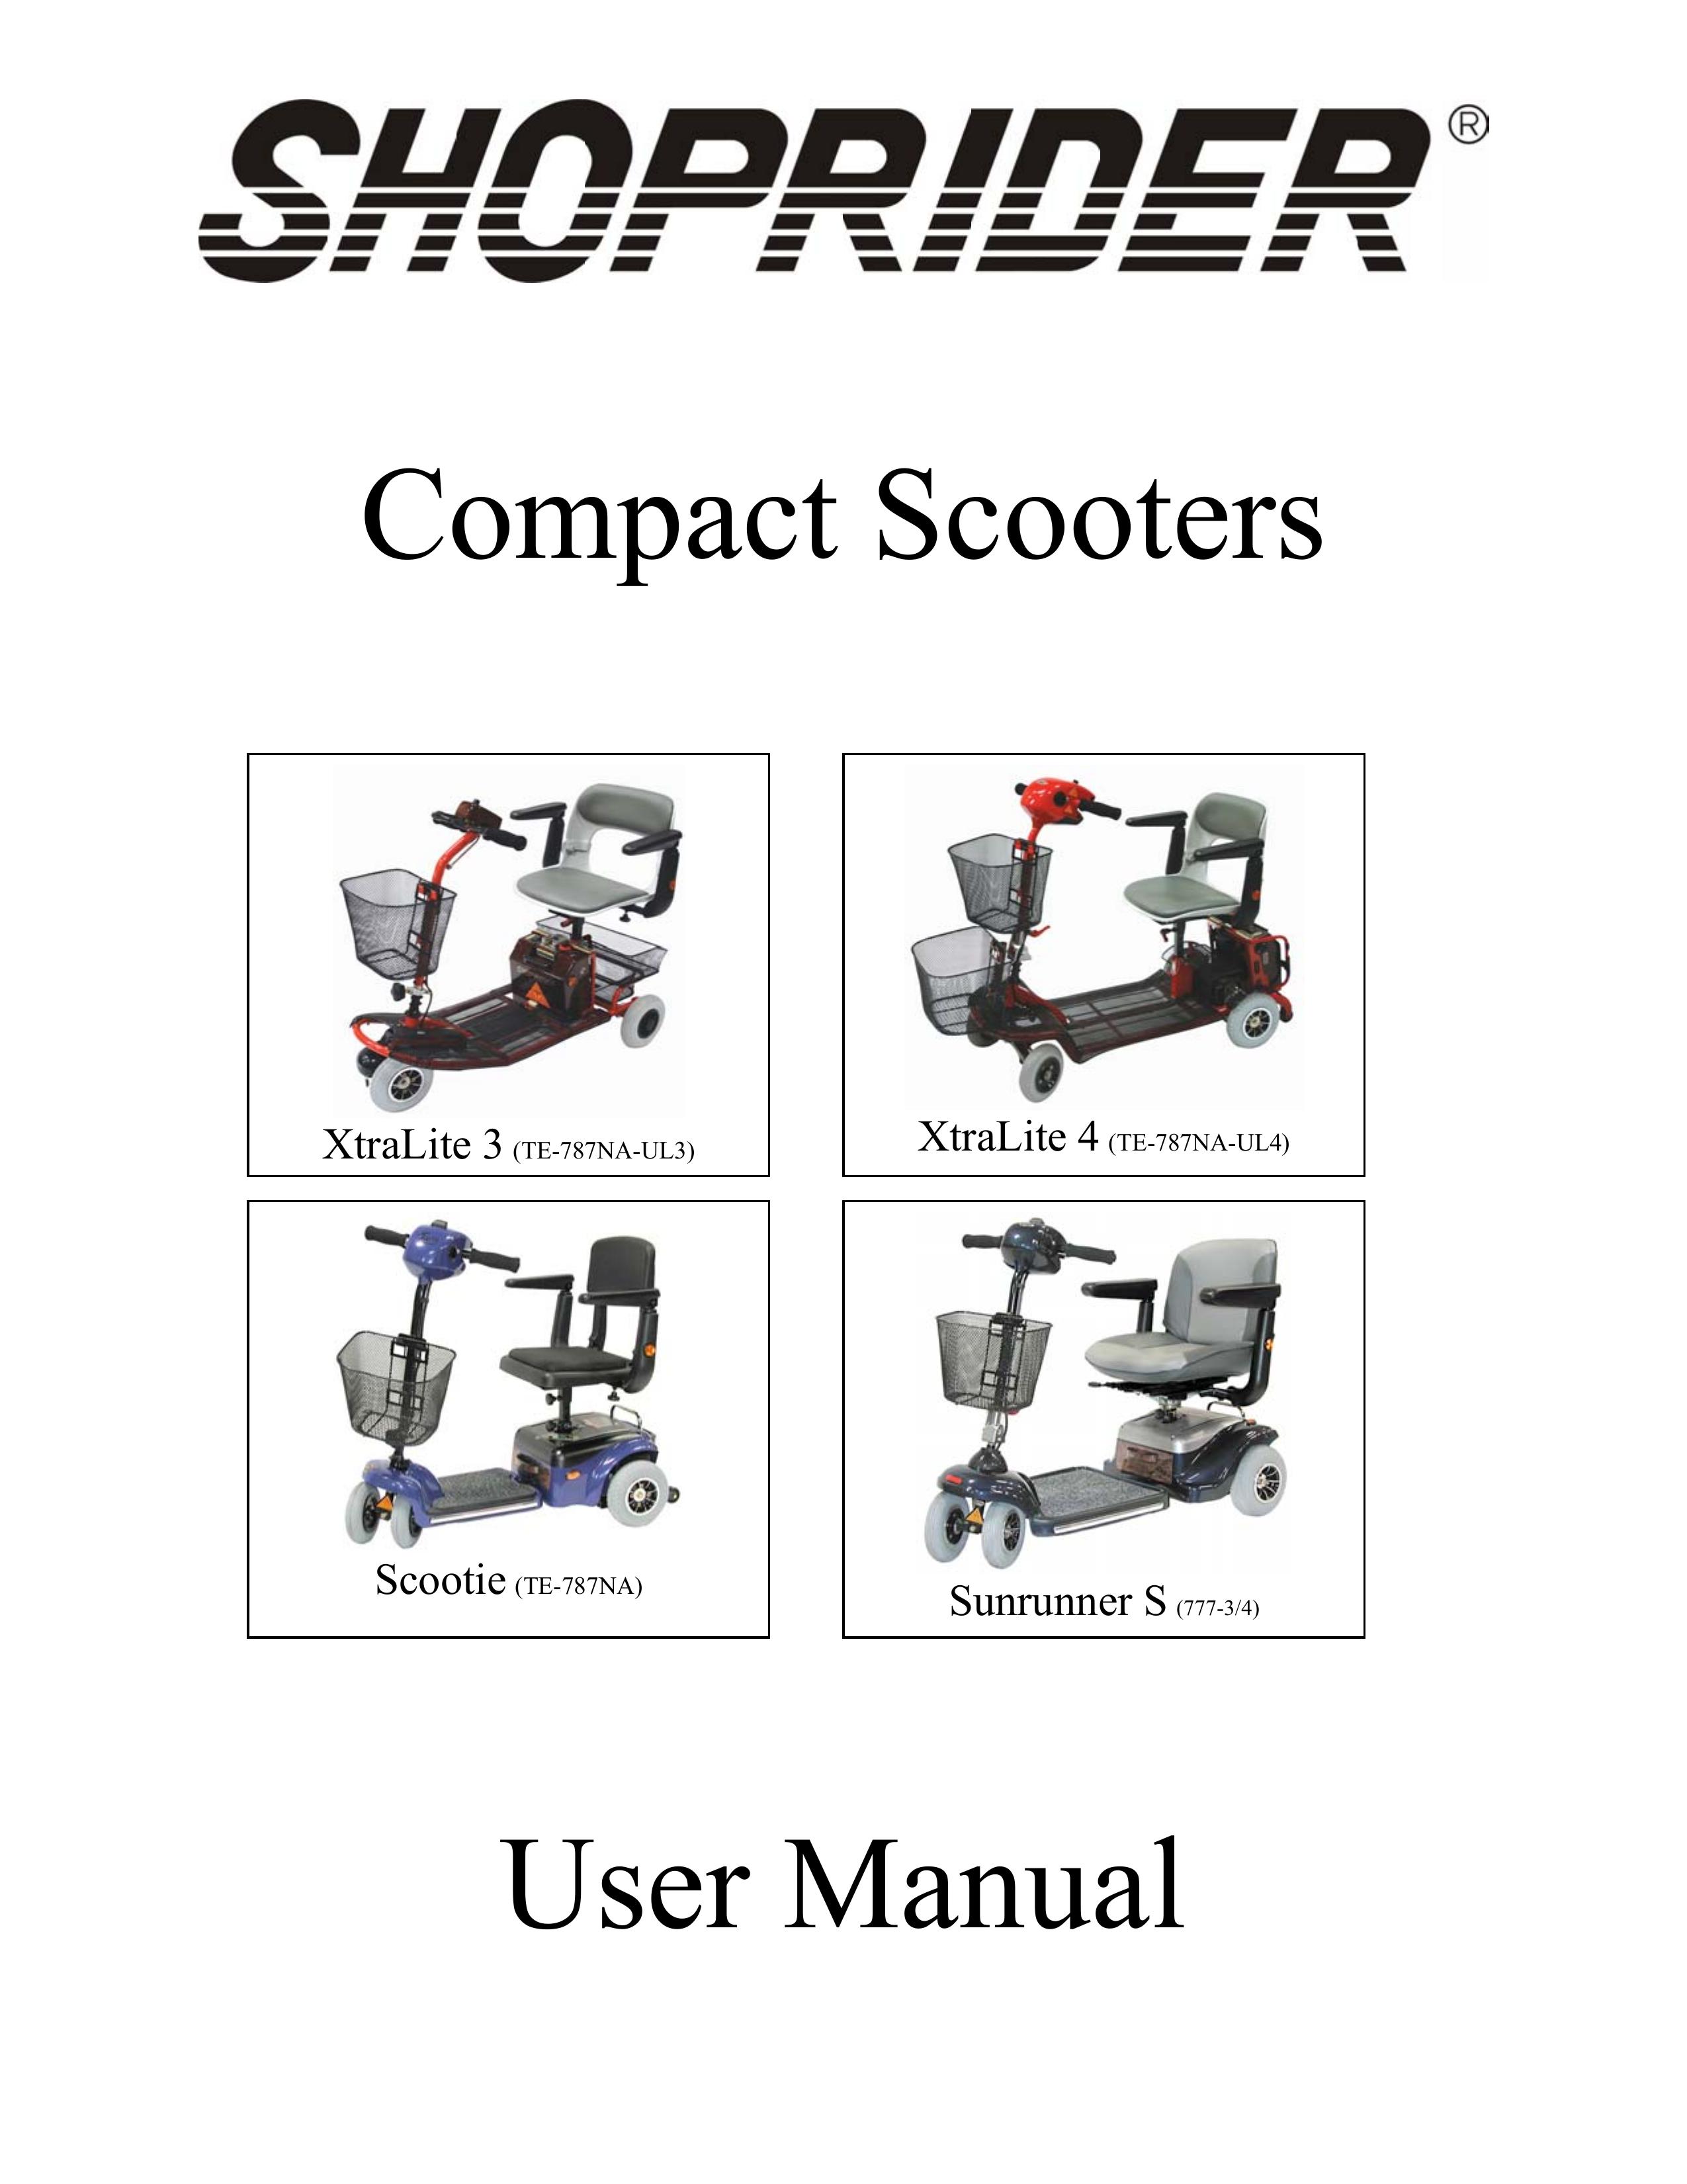 Shoprider Scootie TE-787NA Mobility Aid User Manual